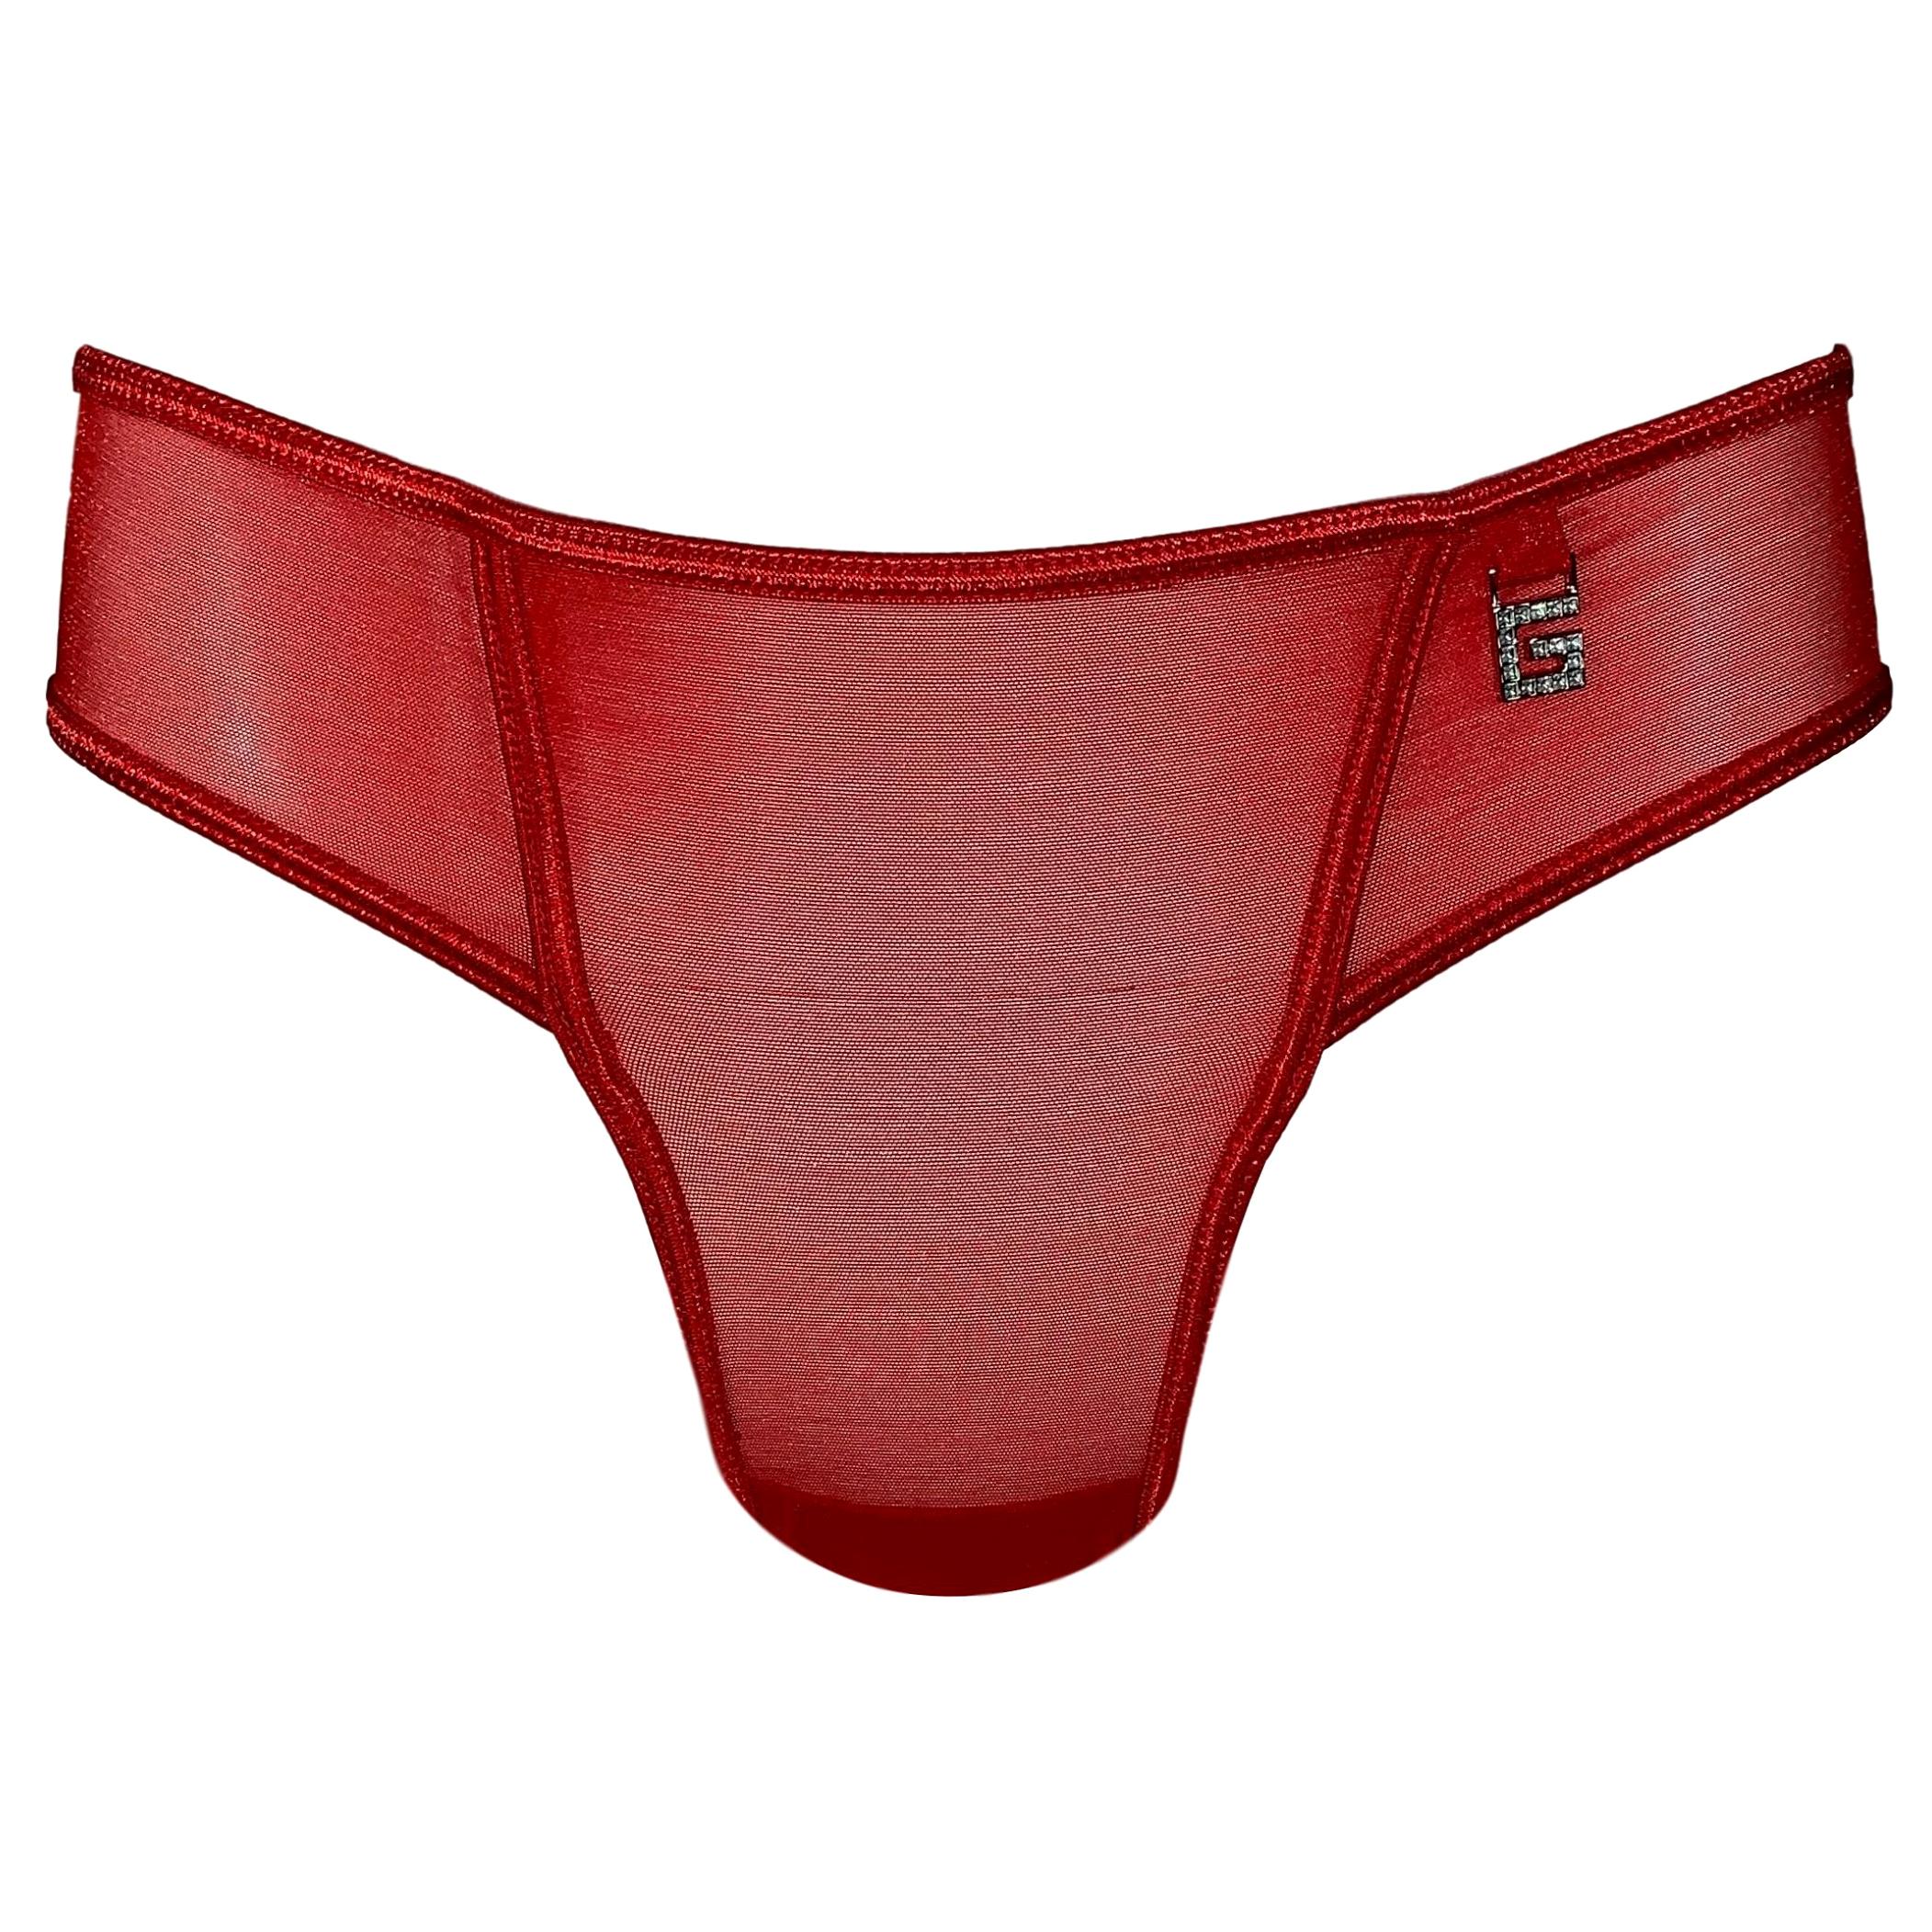 NWT S/S 2001 Gucci by Tom Ford Sheer Red Mesh Crystal G Logo Panty